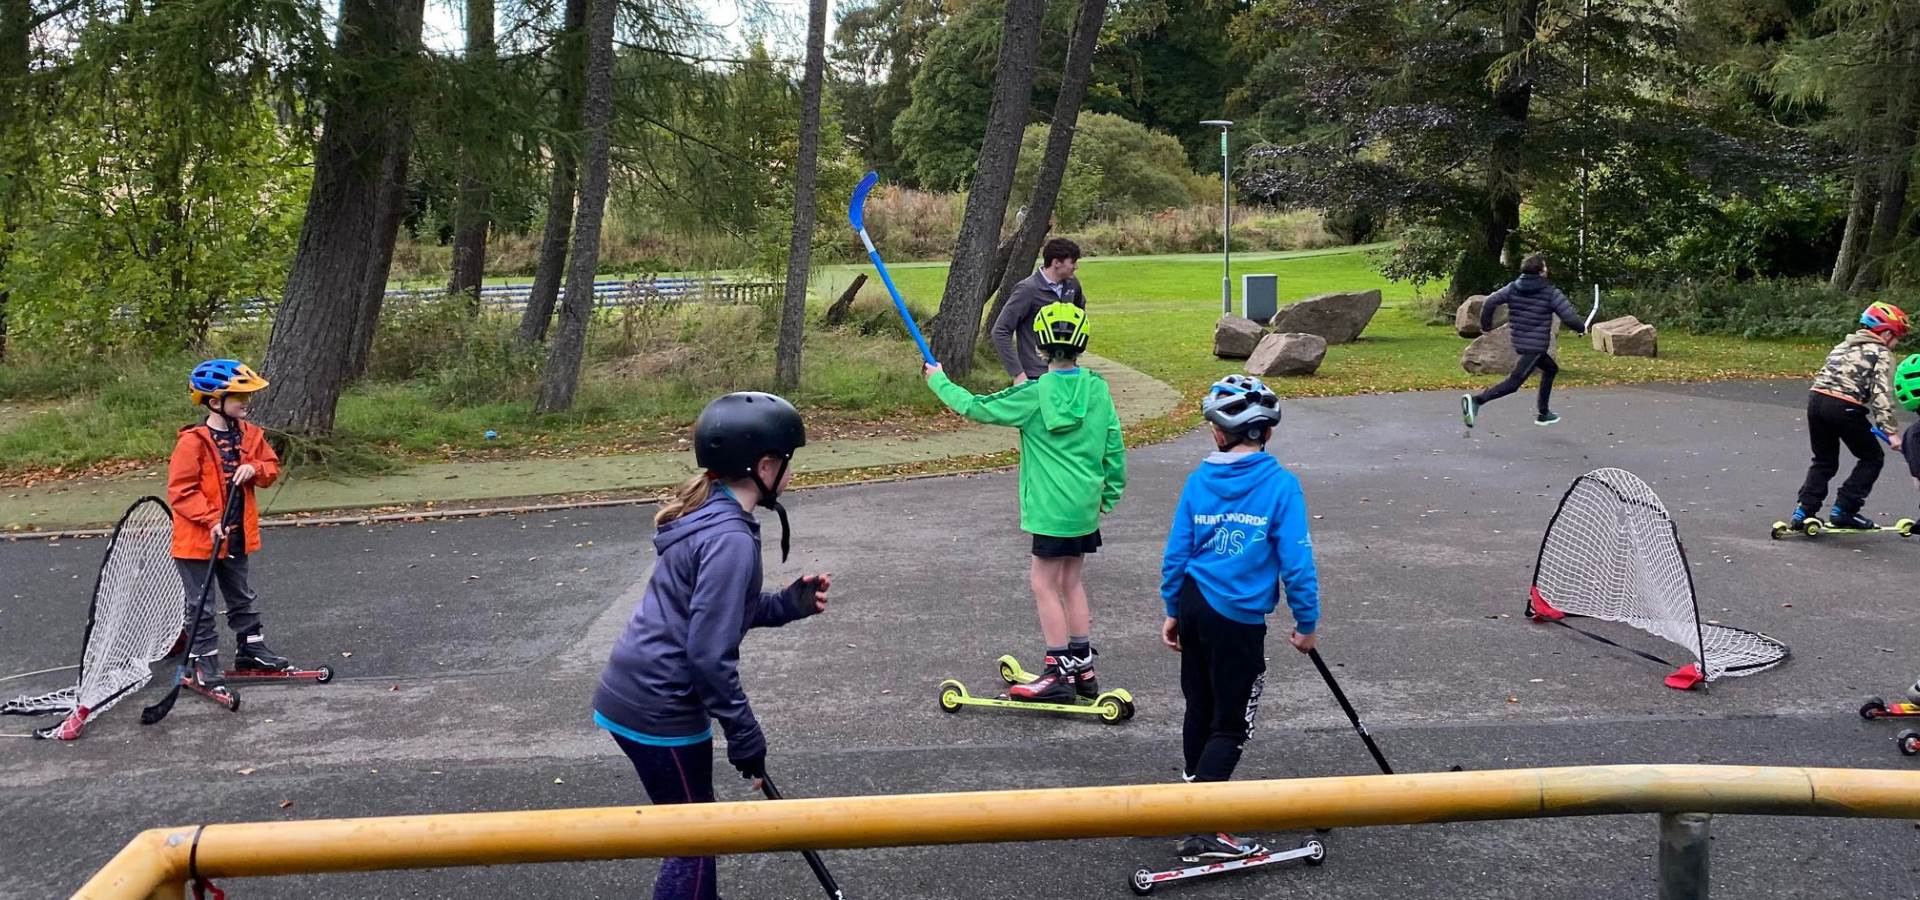 A group of children roller skiing